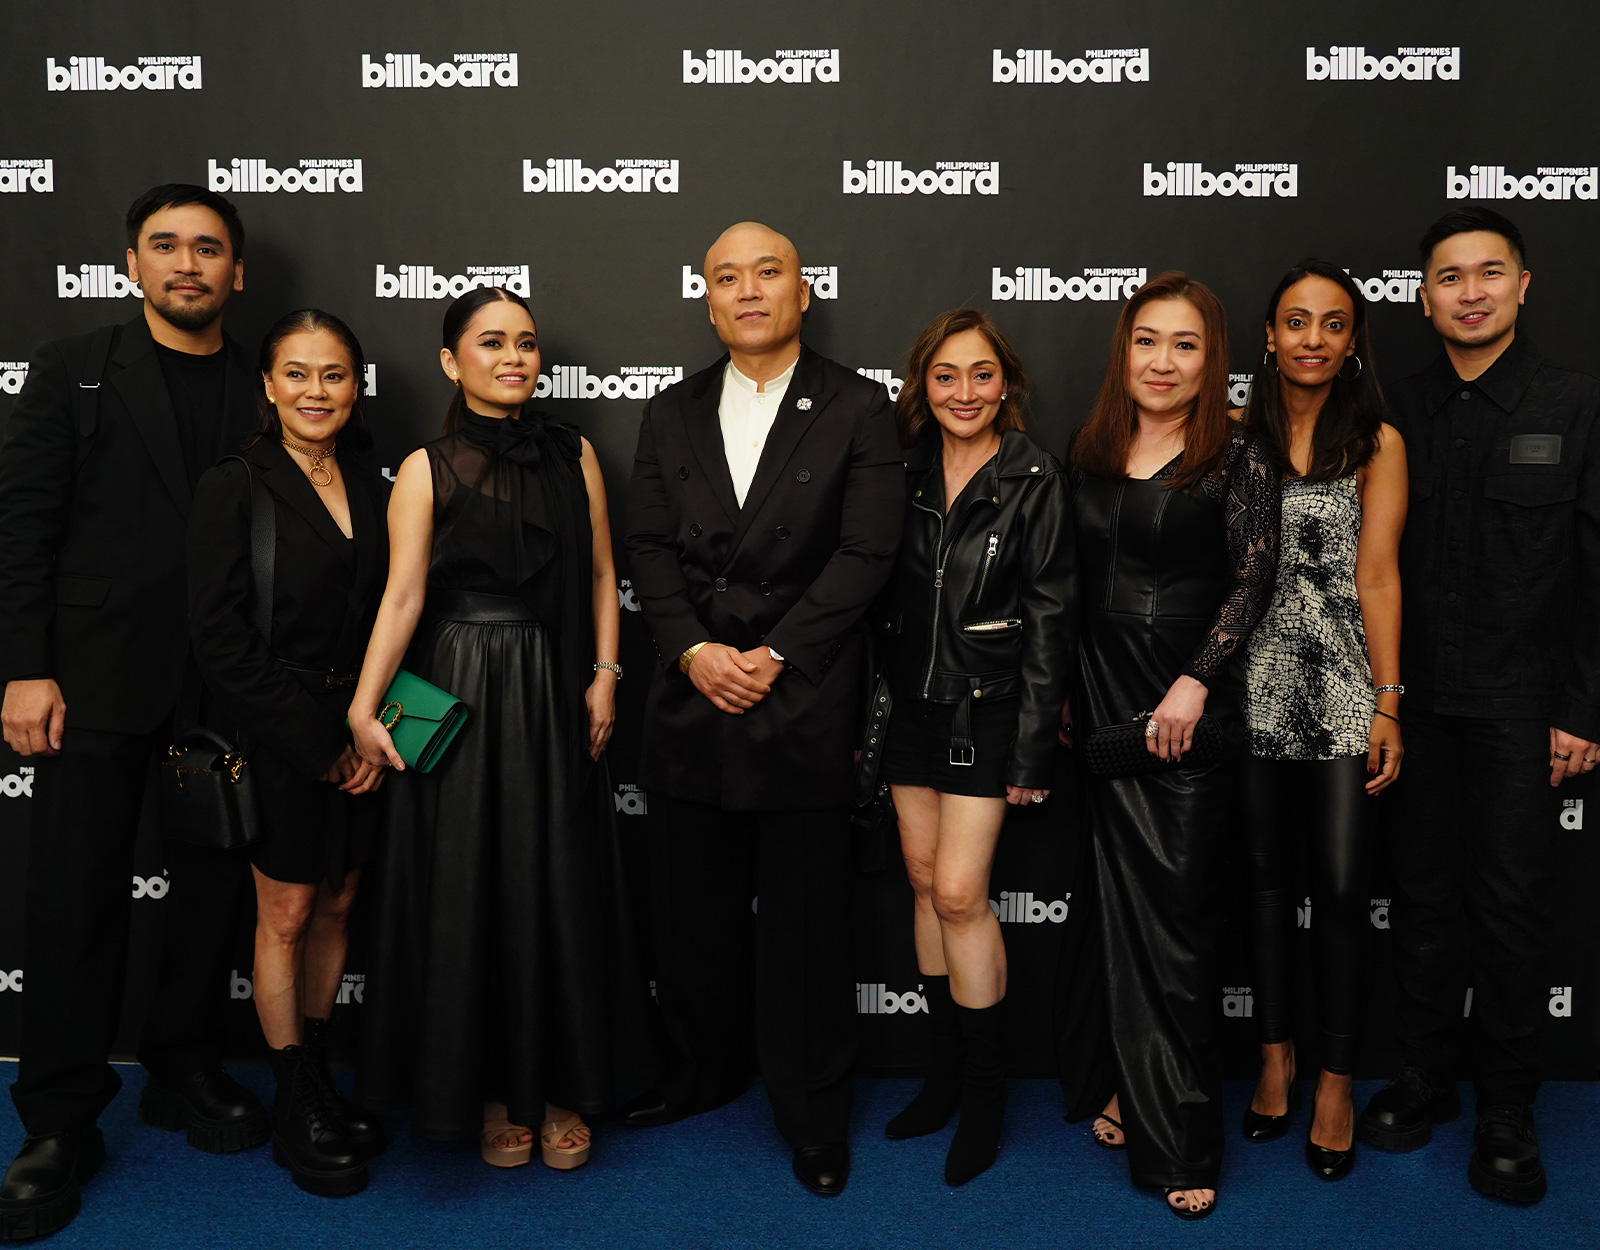 From L to R: AGC Power Holdings Corp. CEO Archie Carrasco; MGLI COO Rhoda Campos-Aldanese; MMGI COO and Billboard Philippines Publisher Anne Bernisca; Billboard President Mike Van; Live Nation Philippines Managing Director Rhiza Pascua; Universal Records Managing Director Kathleen Dy-Go; Penske Media Vice President Gurjeet Chima; and AGC Power Holdings Corp. AVP for Corporate Affairs Randolf Palanca Jr.